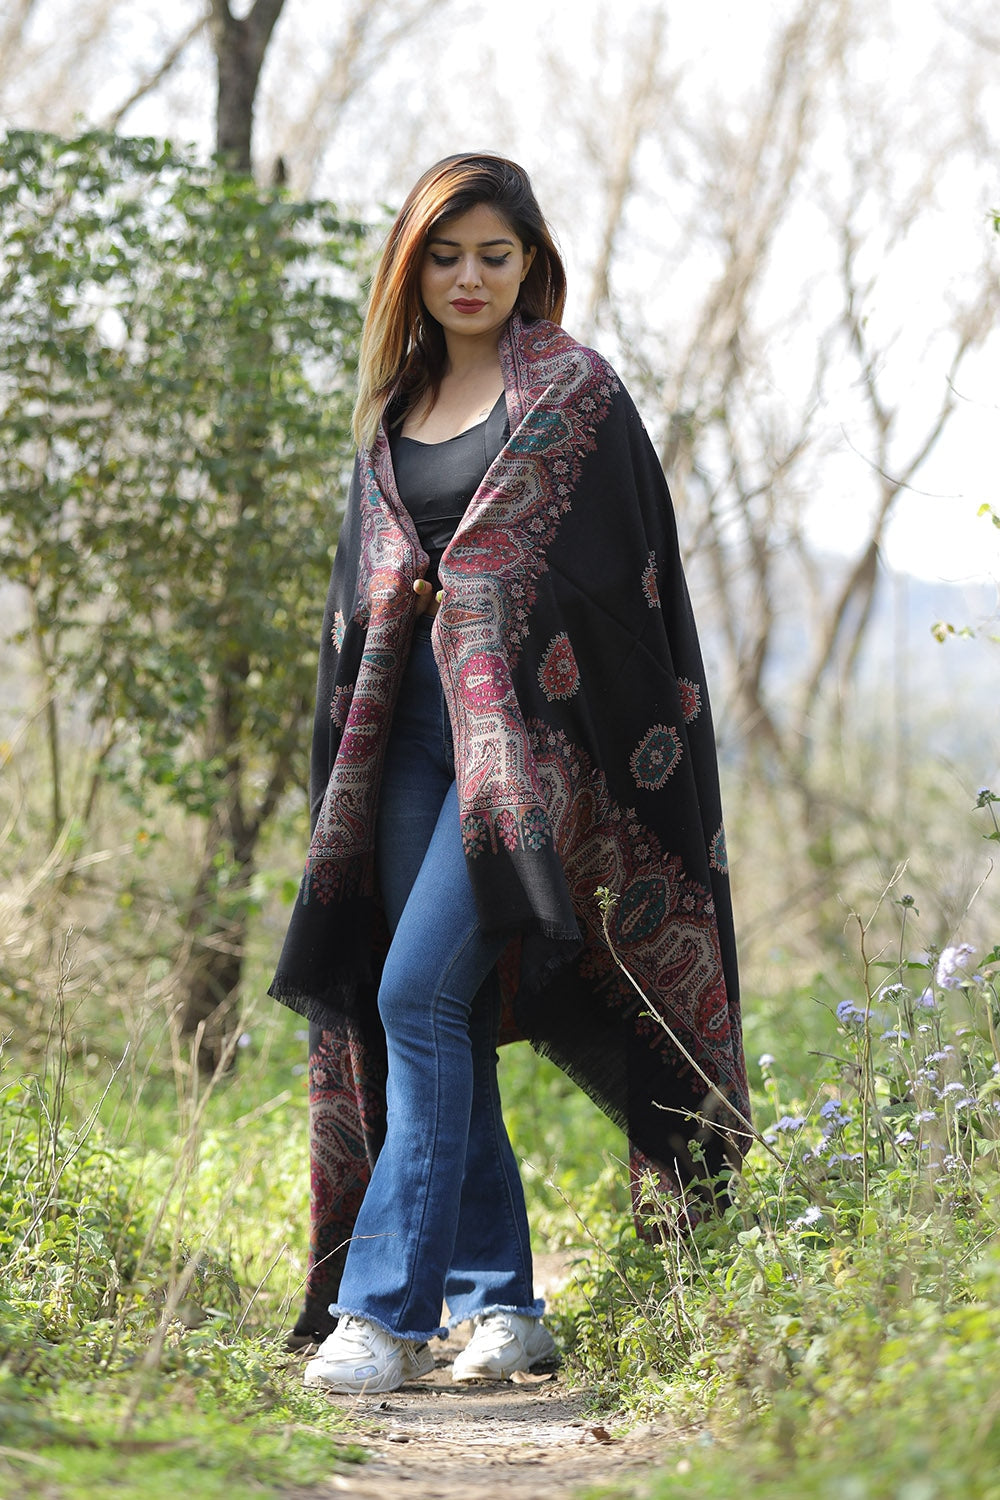 Exotic Charcoal Black Colour Shawl With Flower Pattern